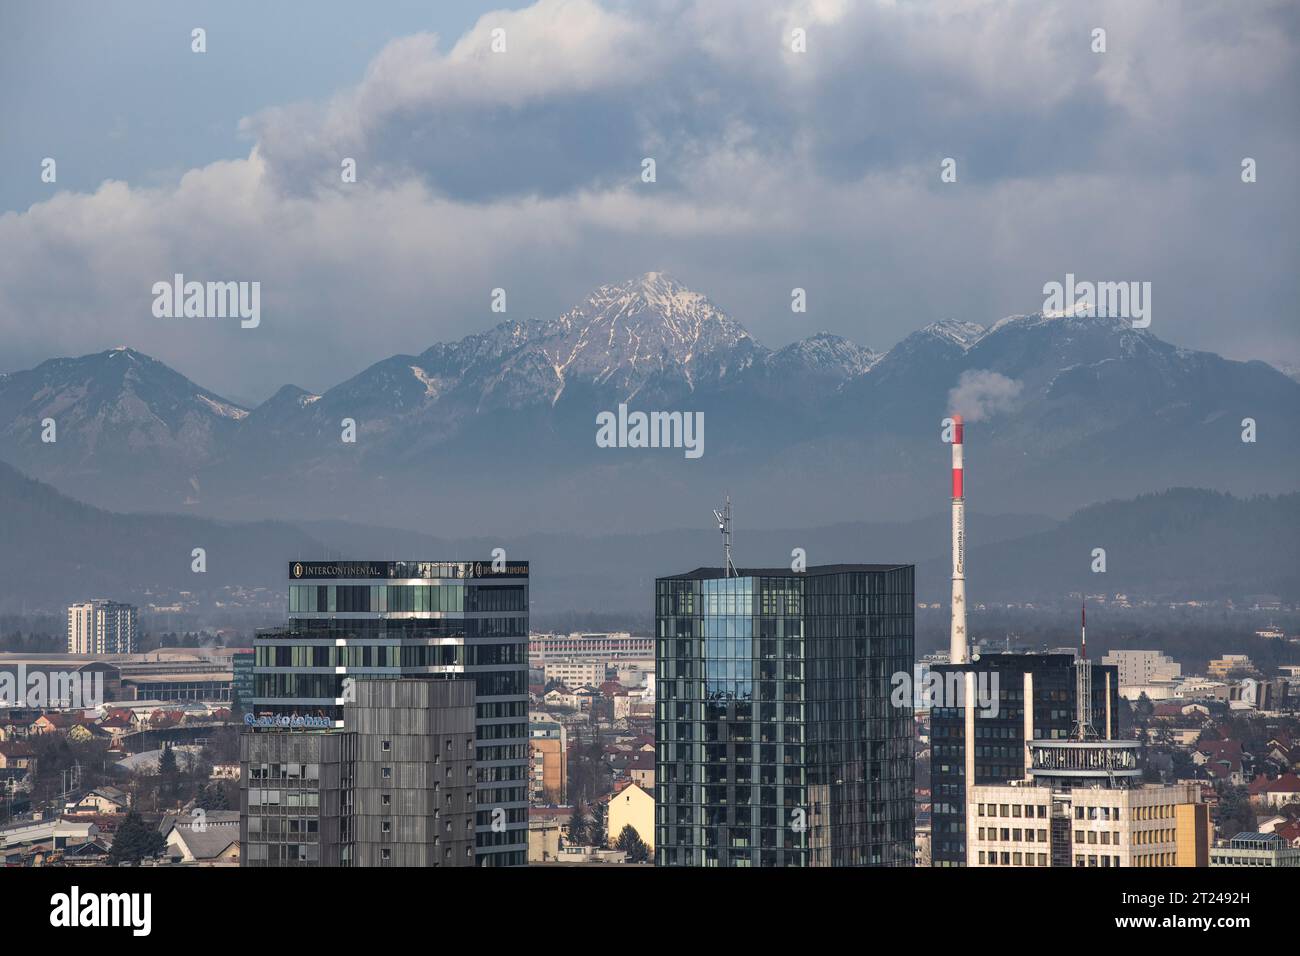 Ljubljana: pollution in the city, with coal industries and chimney. Slovenia Stock Photo